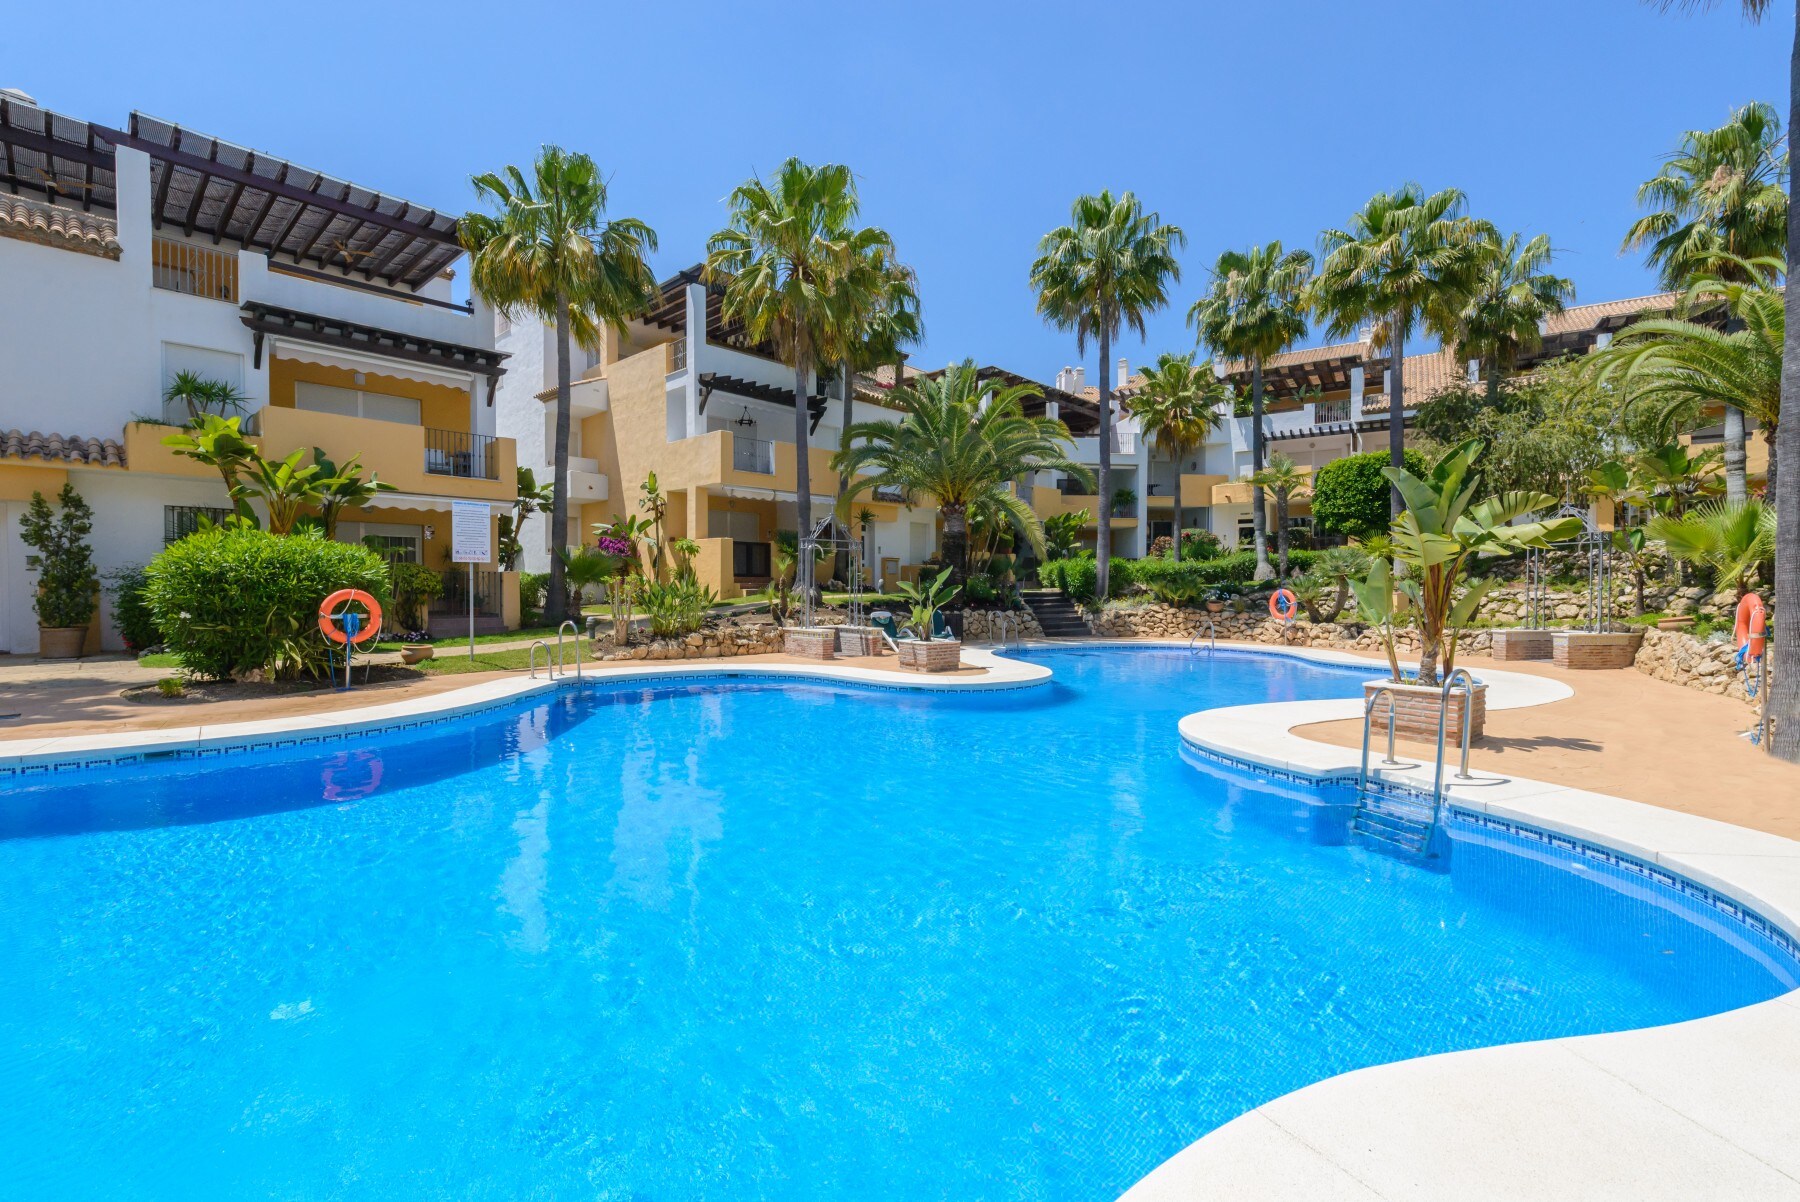 Enjoy the community pool of this apartment in Marbella